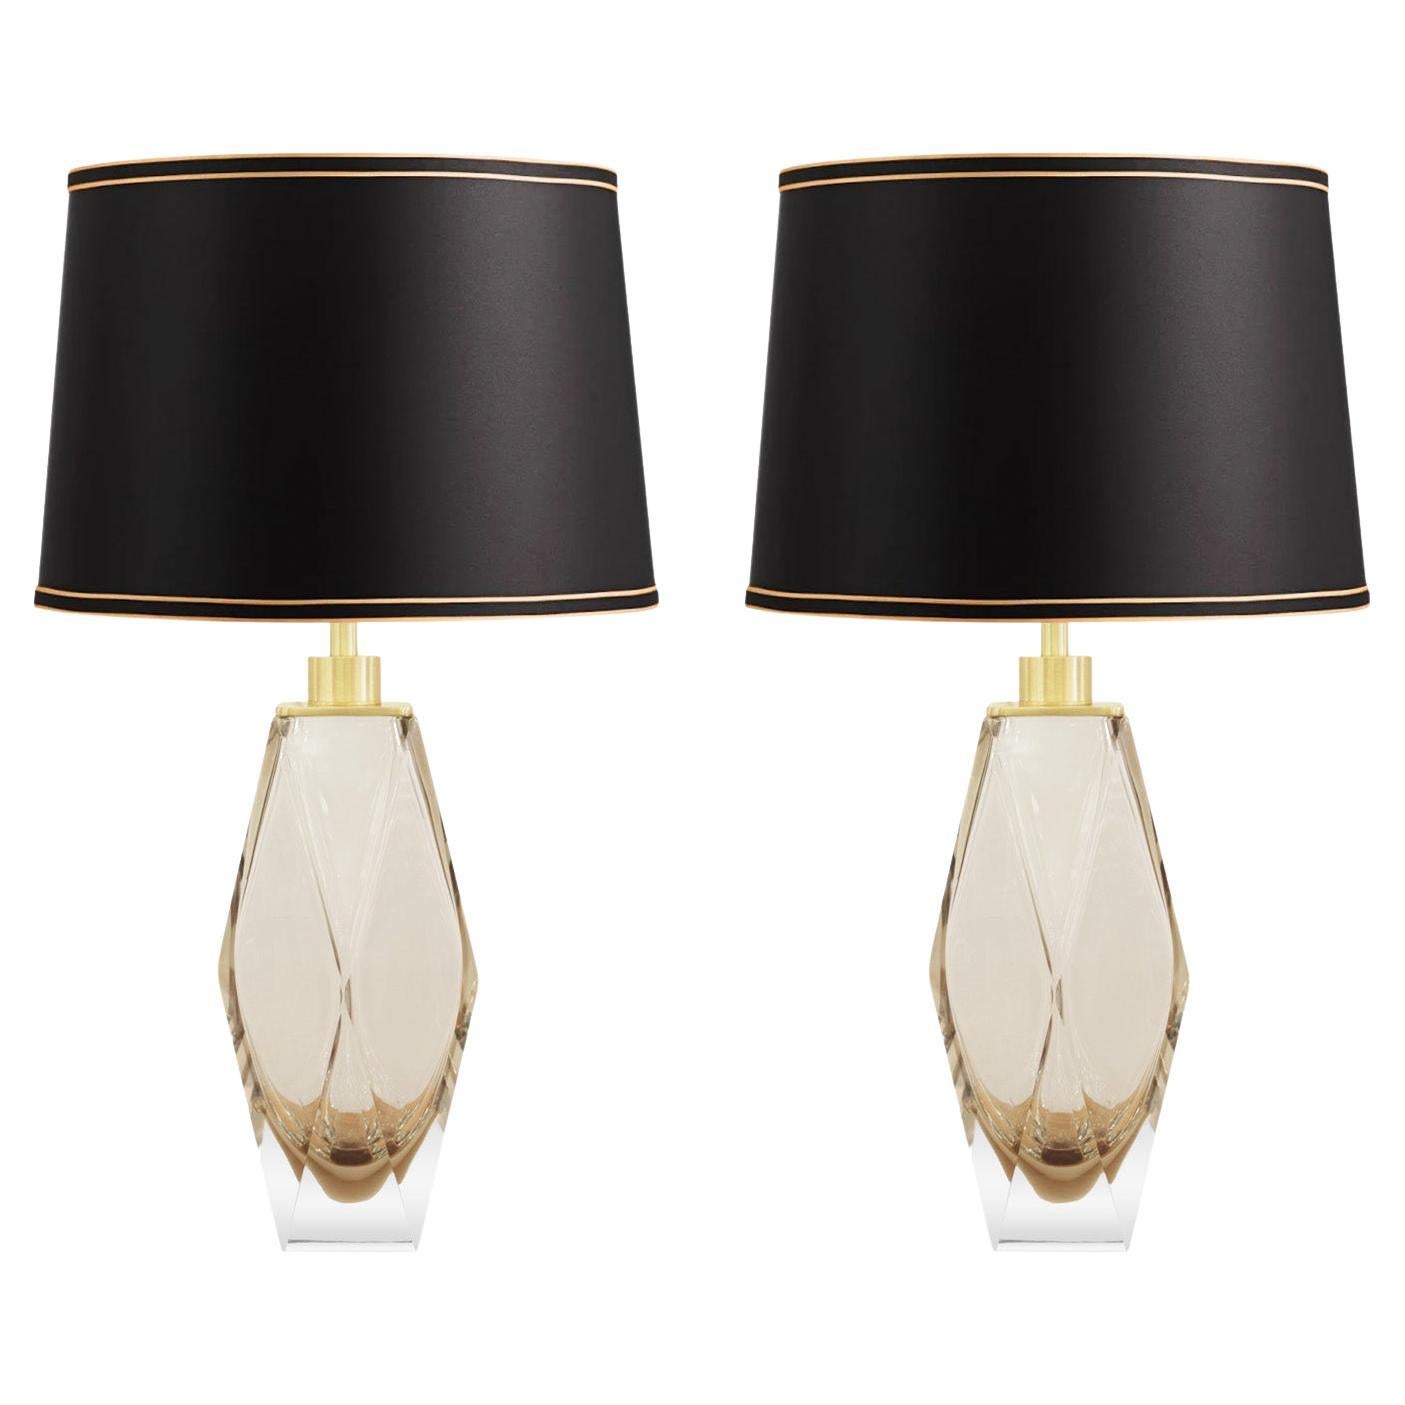 Elegant Pair of Faceted Champagne Color Murano Glass Table Lamps